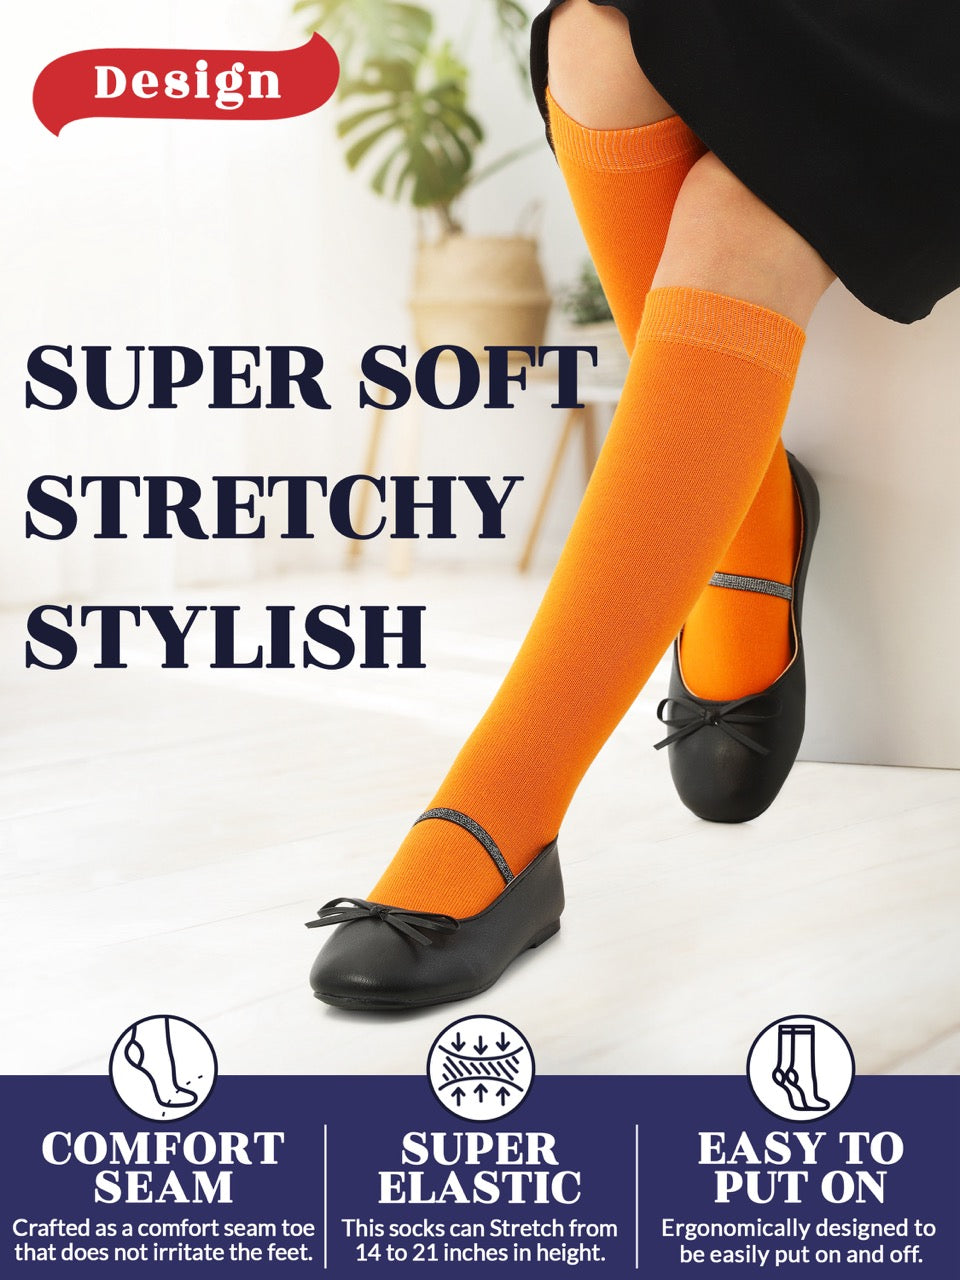 Experience the ultimate comfort and style with Hugh Ugoli Kids Bamboo School Socks. These pumpkin orange socks perfect for school or everyday wear, our high-quality knee-high socks meet uniform standards while reducing blisters and staying in place. Available in four sizes for children aged 3-14 years